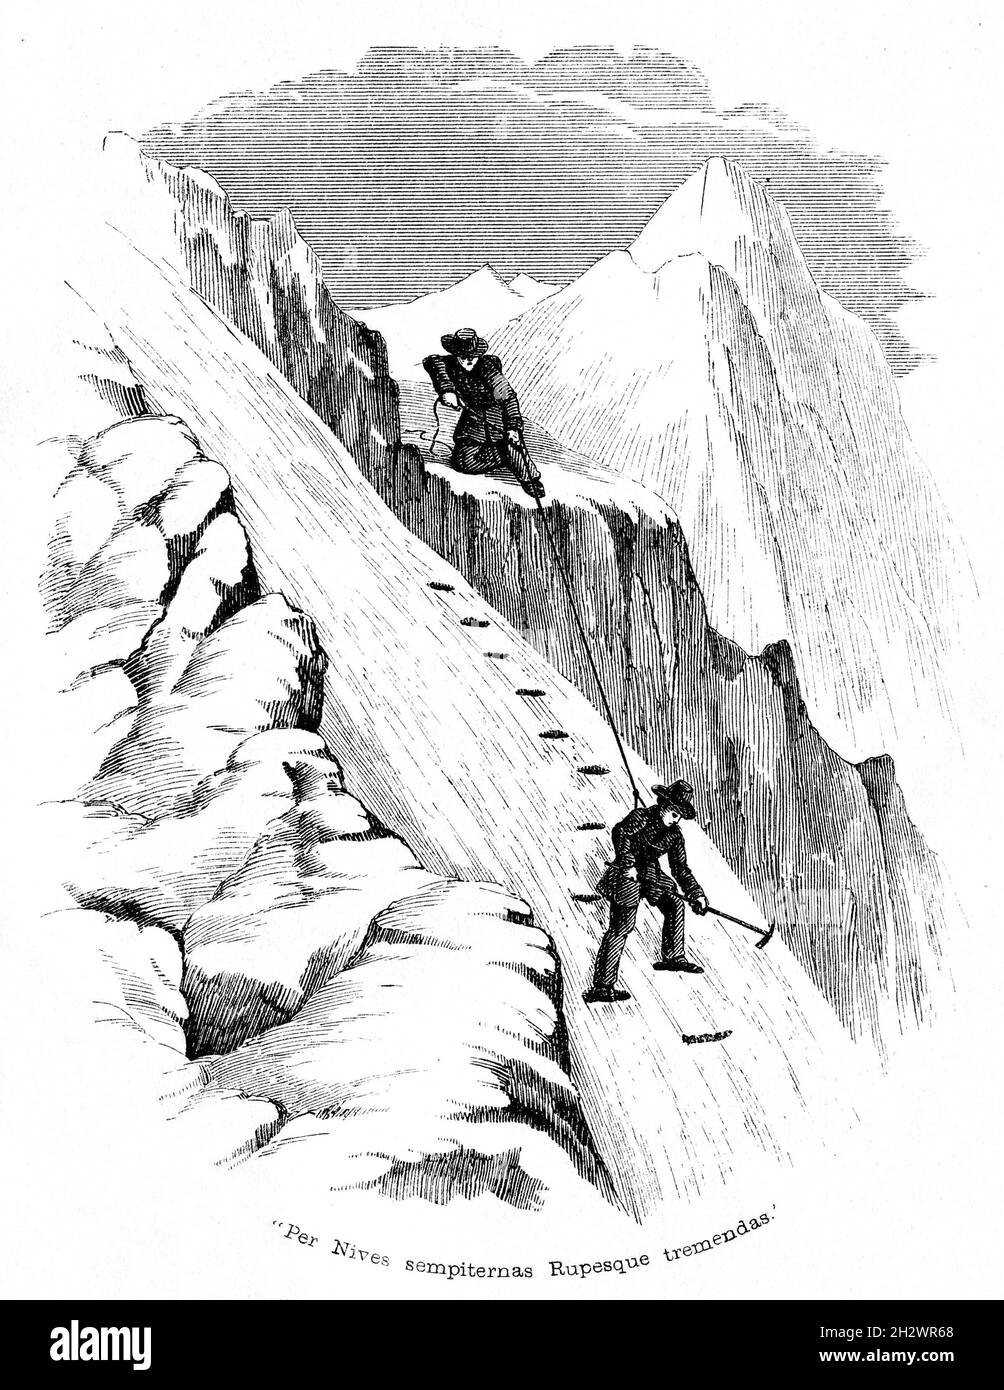 An 1859 illustration entitled “Per Nives sempiternas Rupesque tremendas” (Through the everlasting snow and the dreadful cliffs). It depicts two 19th century mountaineers descending a mountain face. One is cutting steps into the ice with his axe while his partner is supporting him with a rope. Stock Photo